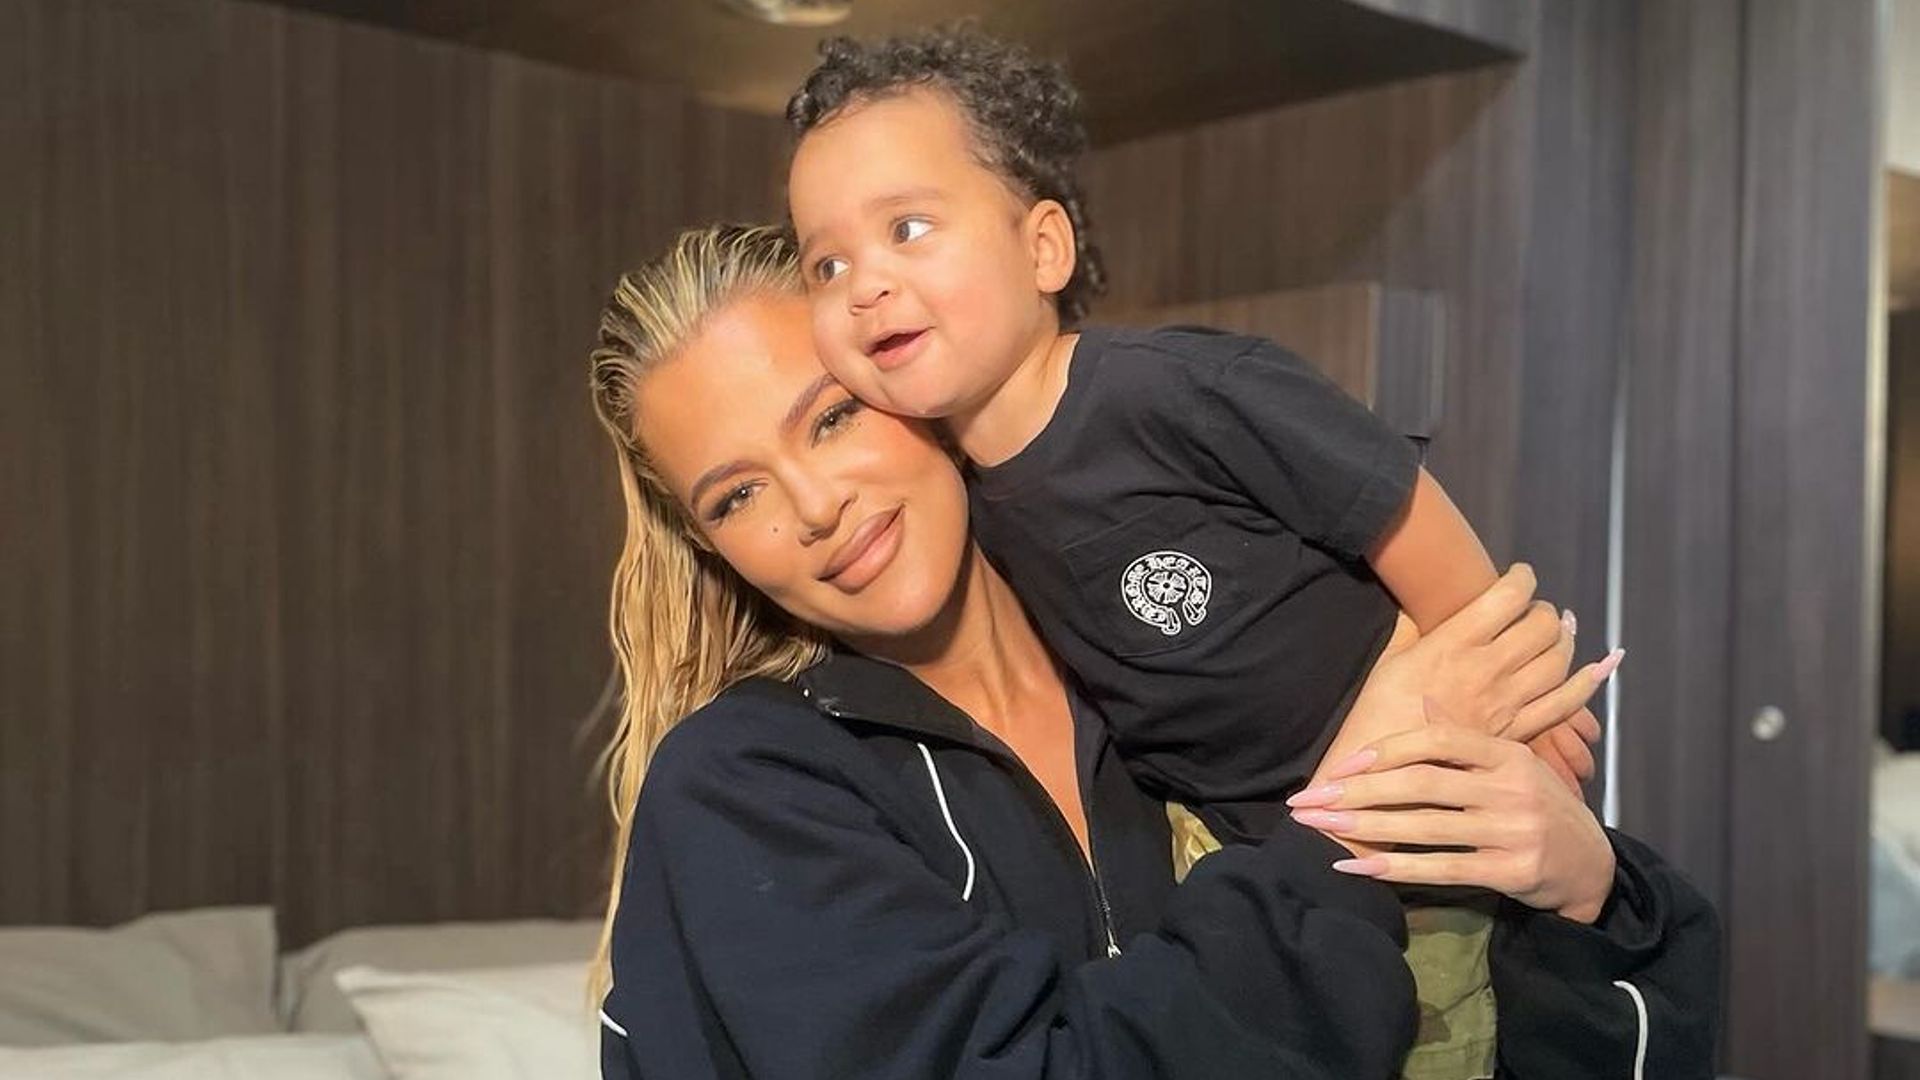 Khloé Kardashian reveals she struggled to bond with son Tatum in personal interview